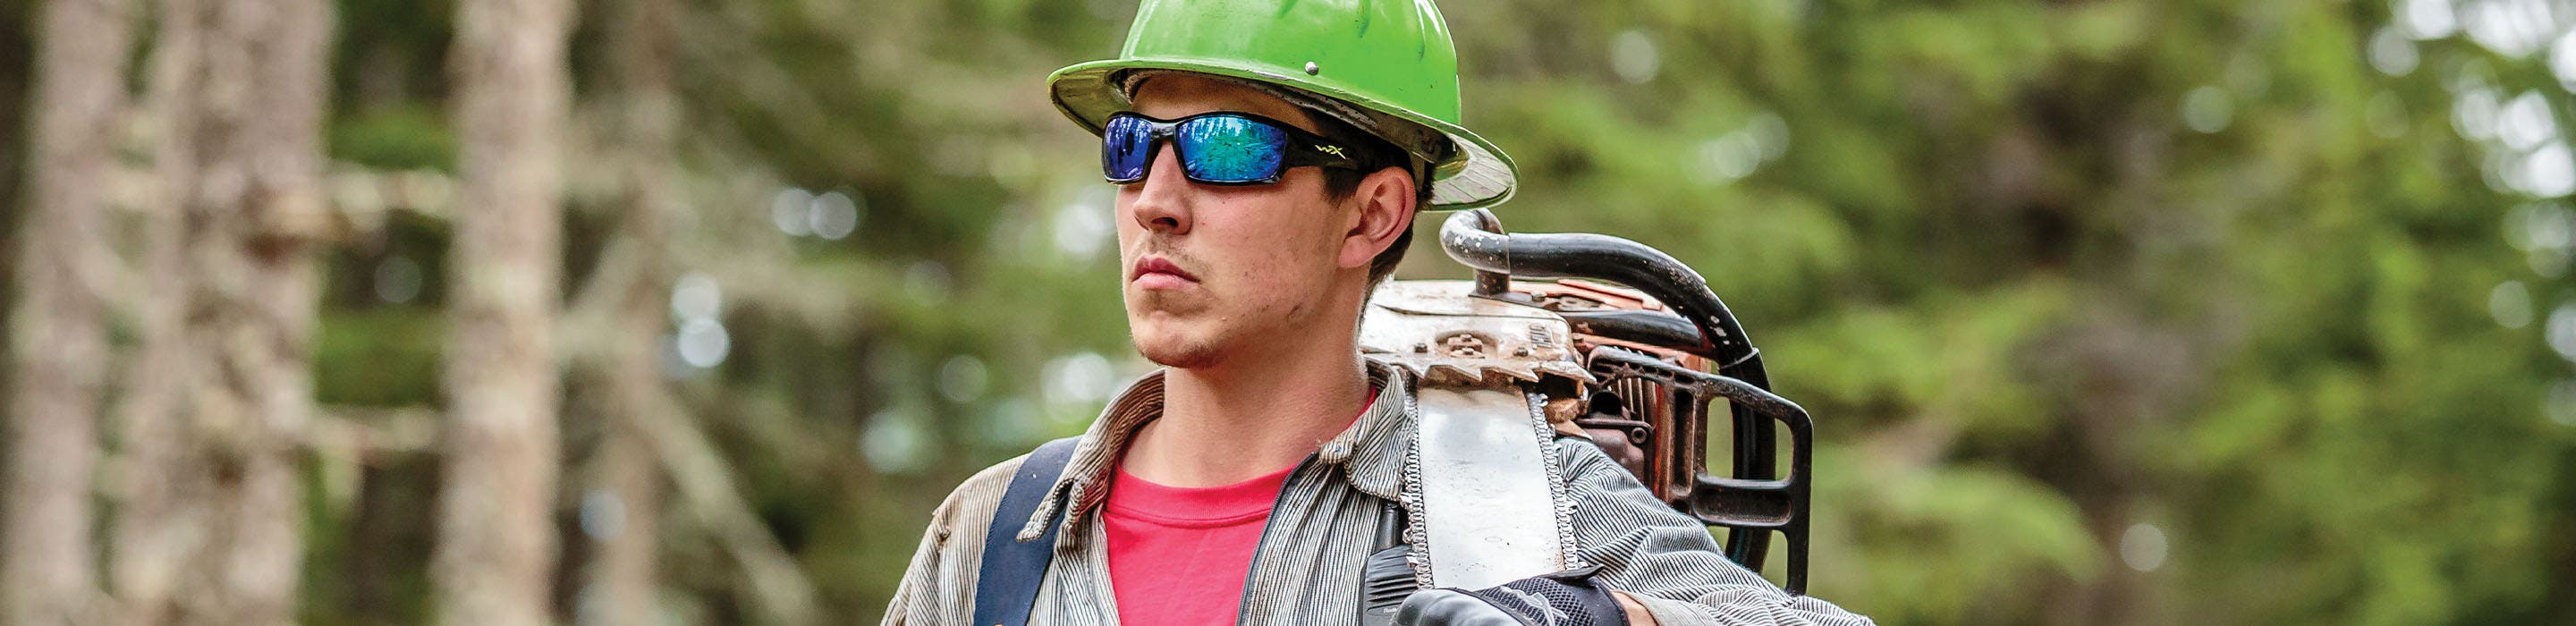 A man in safety sunglasses wearing a green hard hat stands in a forest.